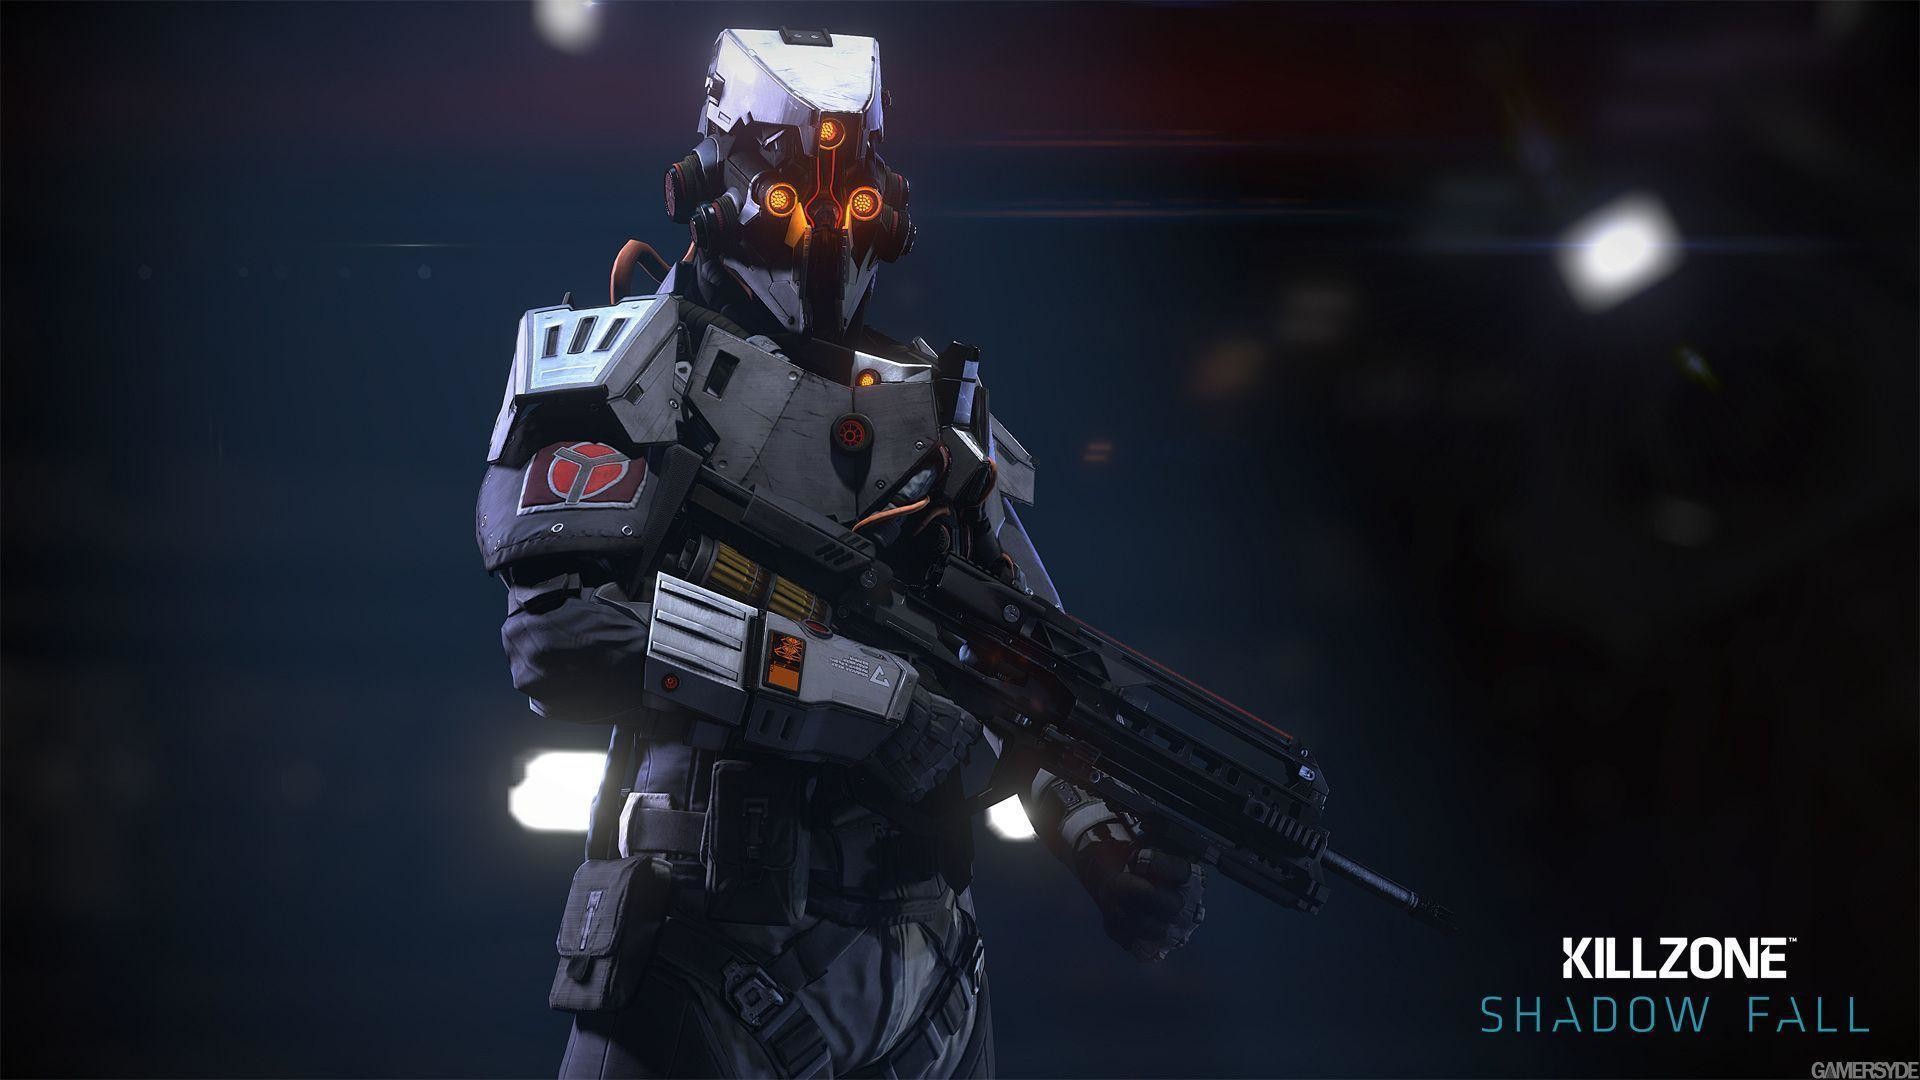 1920x1080 Killzone: Shadow Fall: villain wallpapers and images - wallpapers .